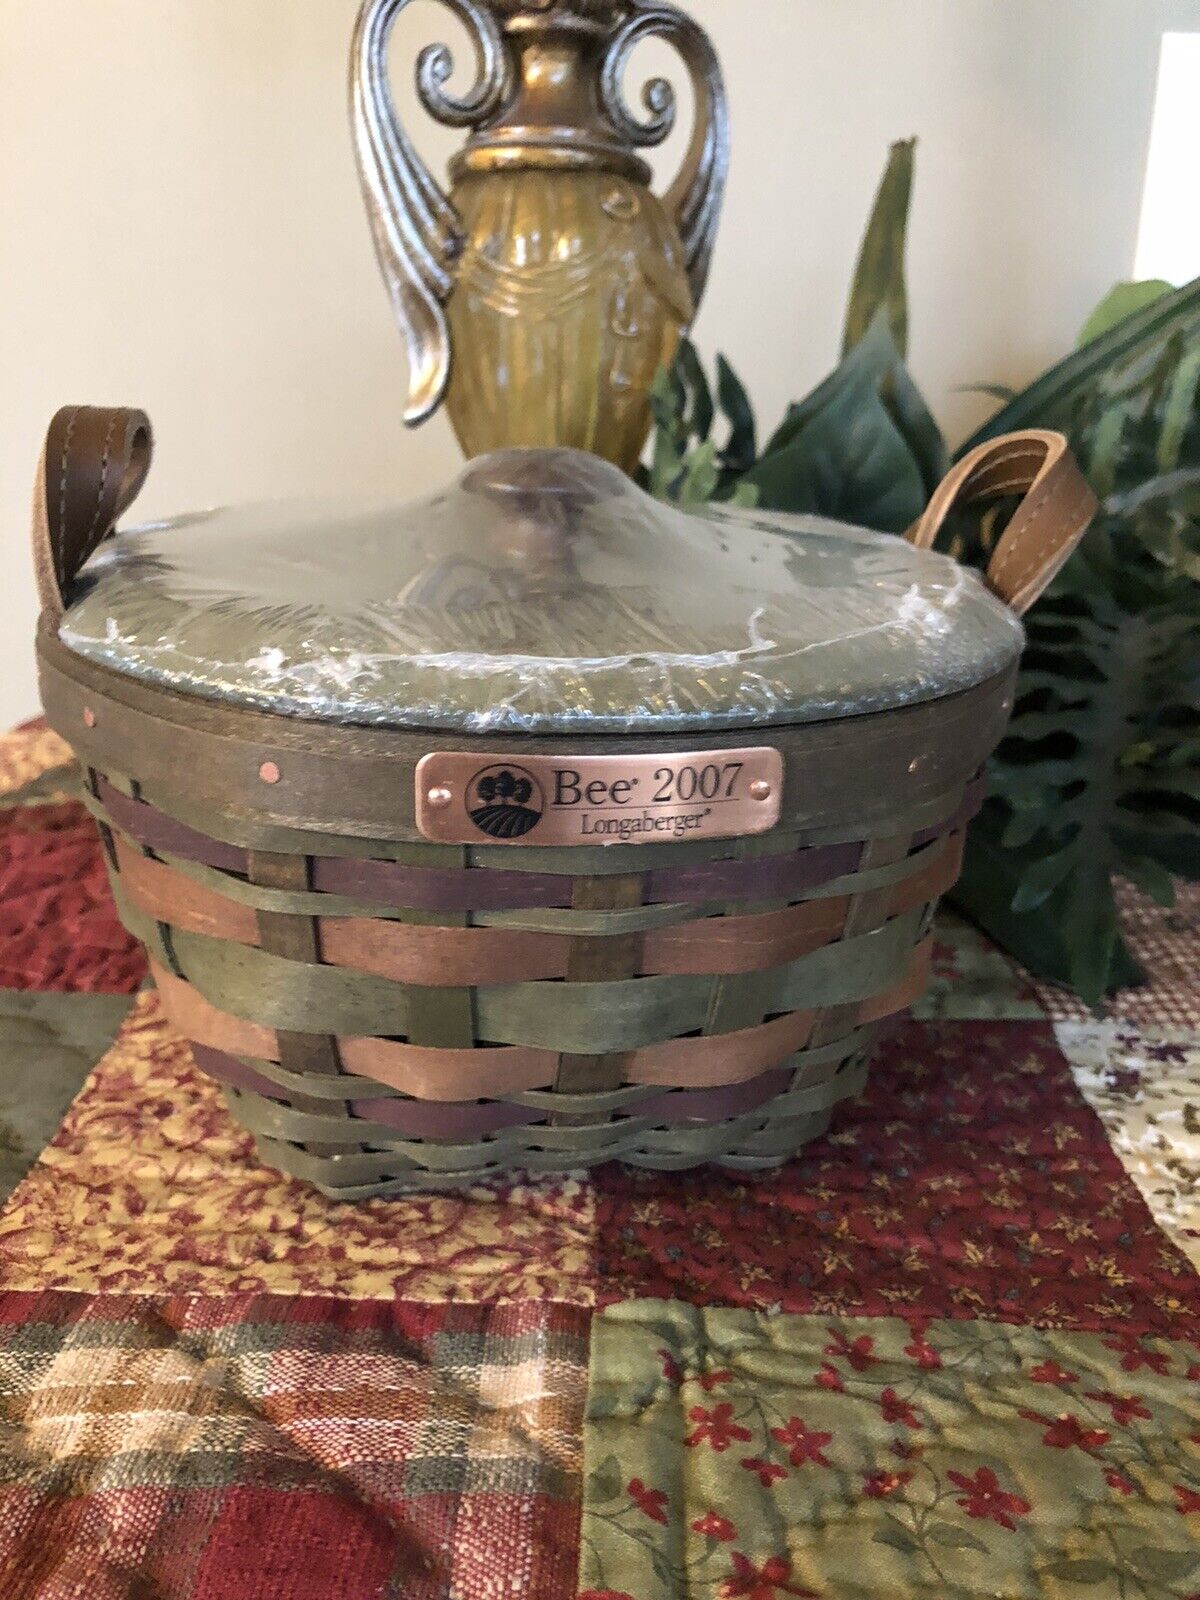 Longaberger 2007 American Craft Bee Basket, lid Liner and protector